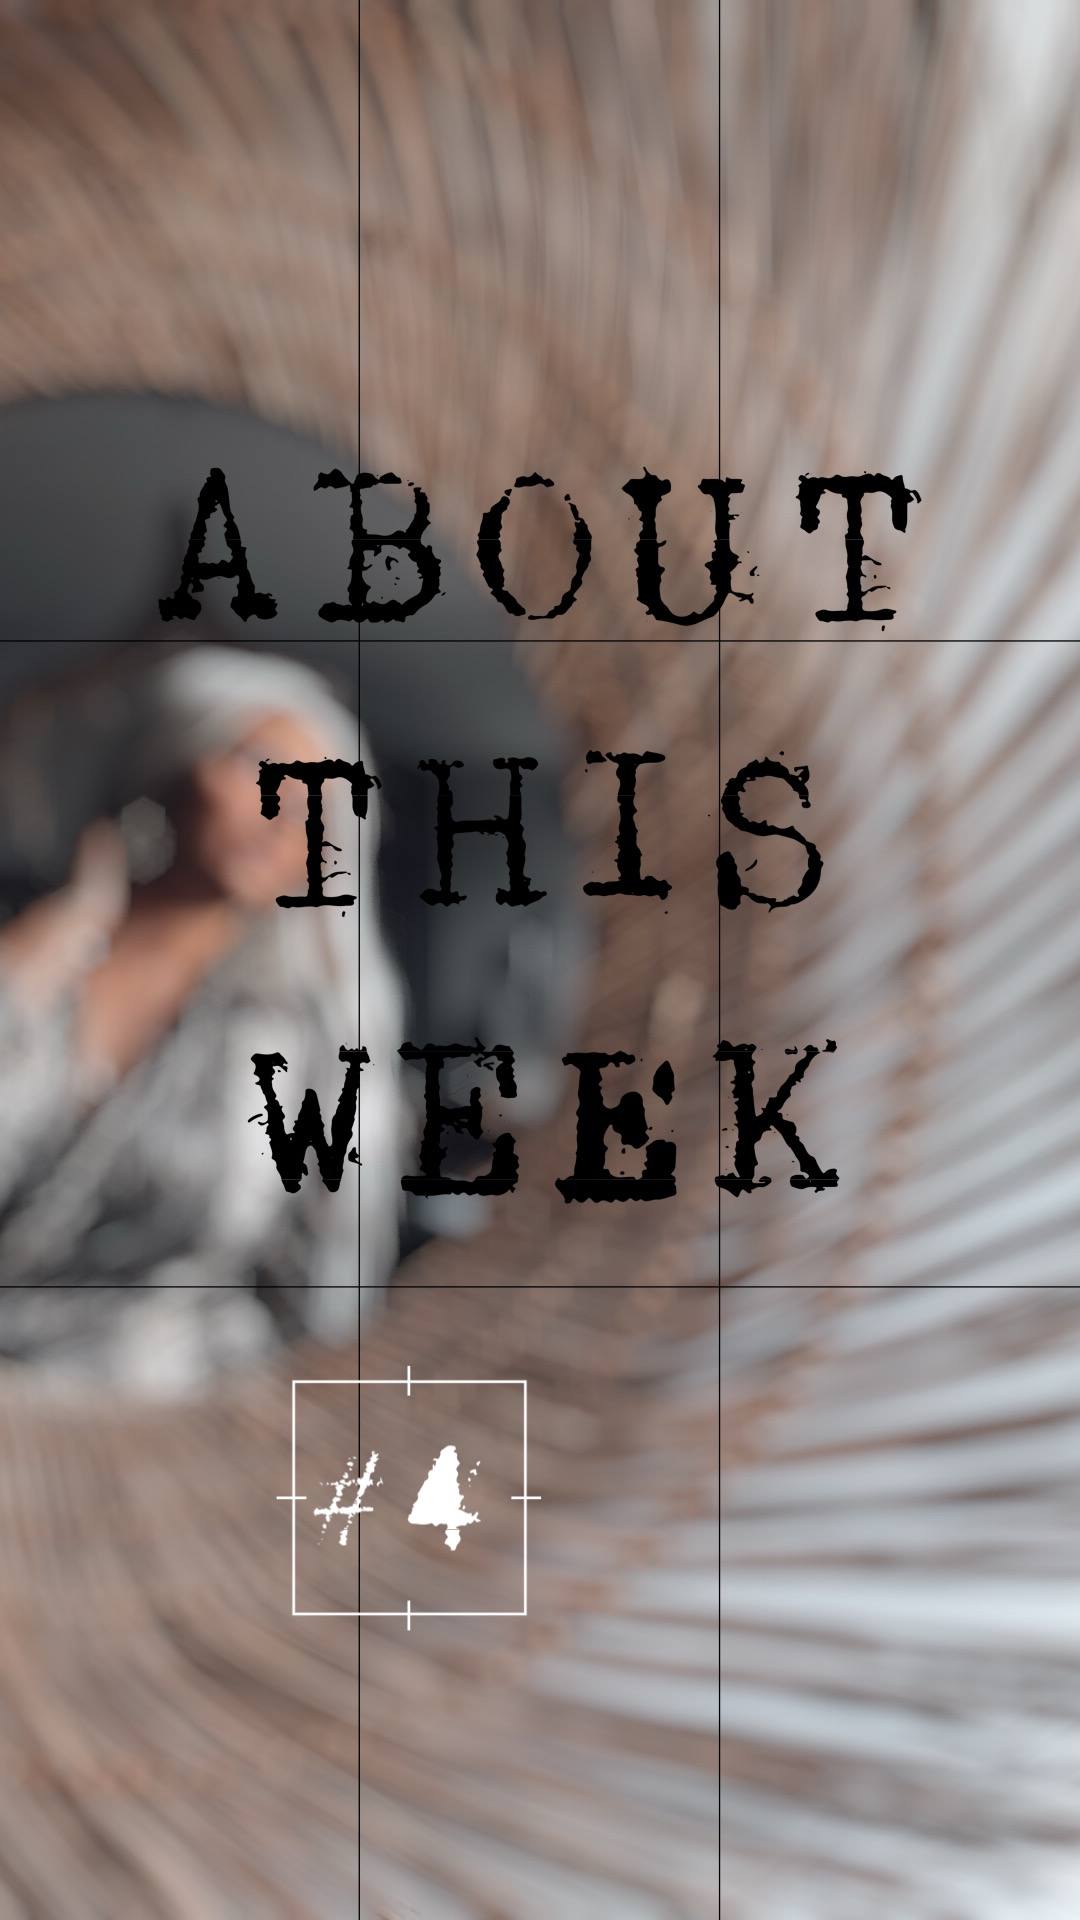 About this week #4